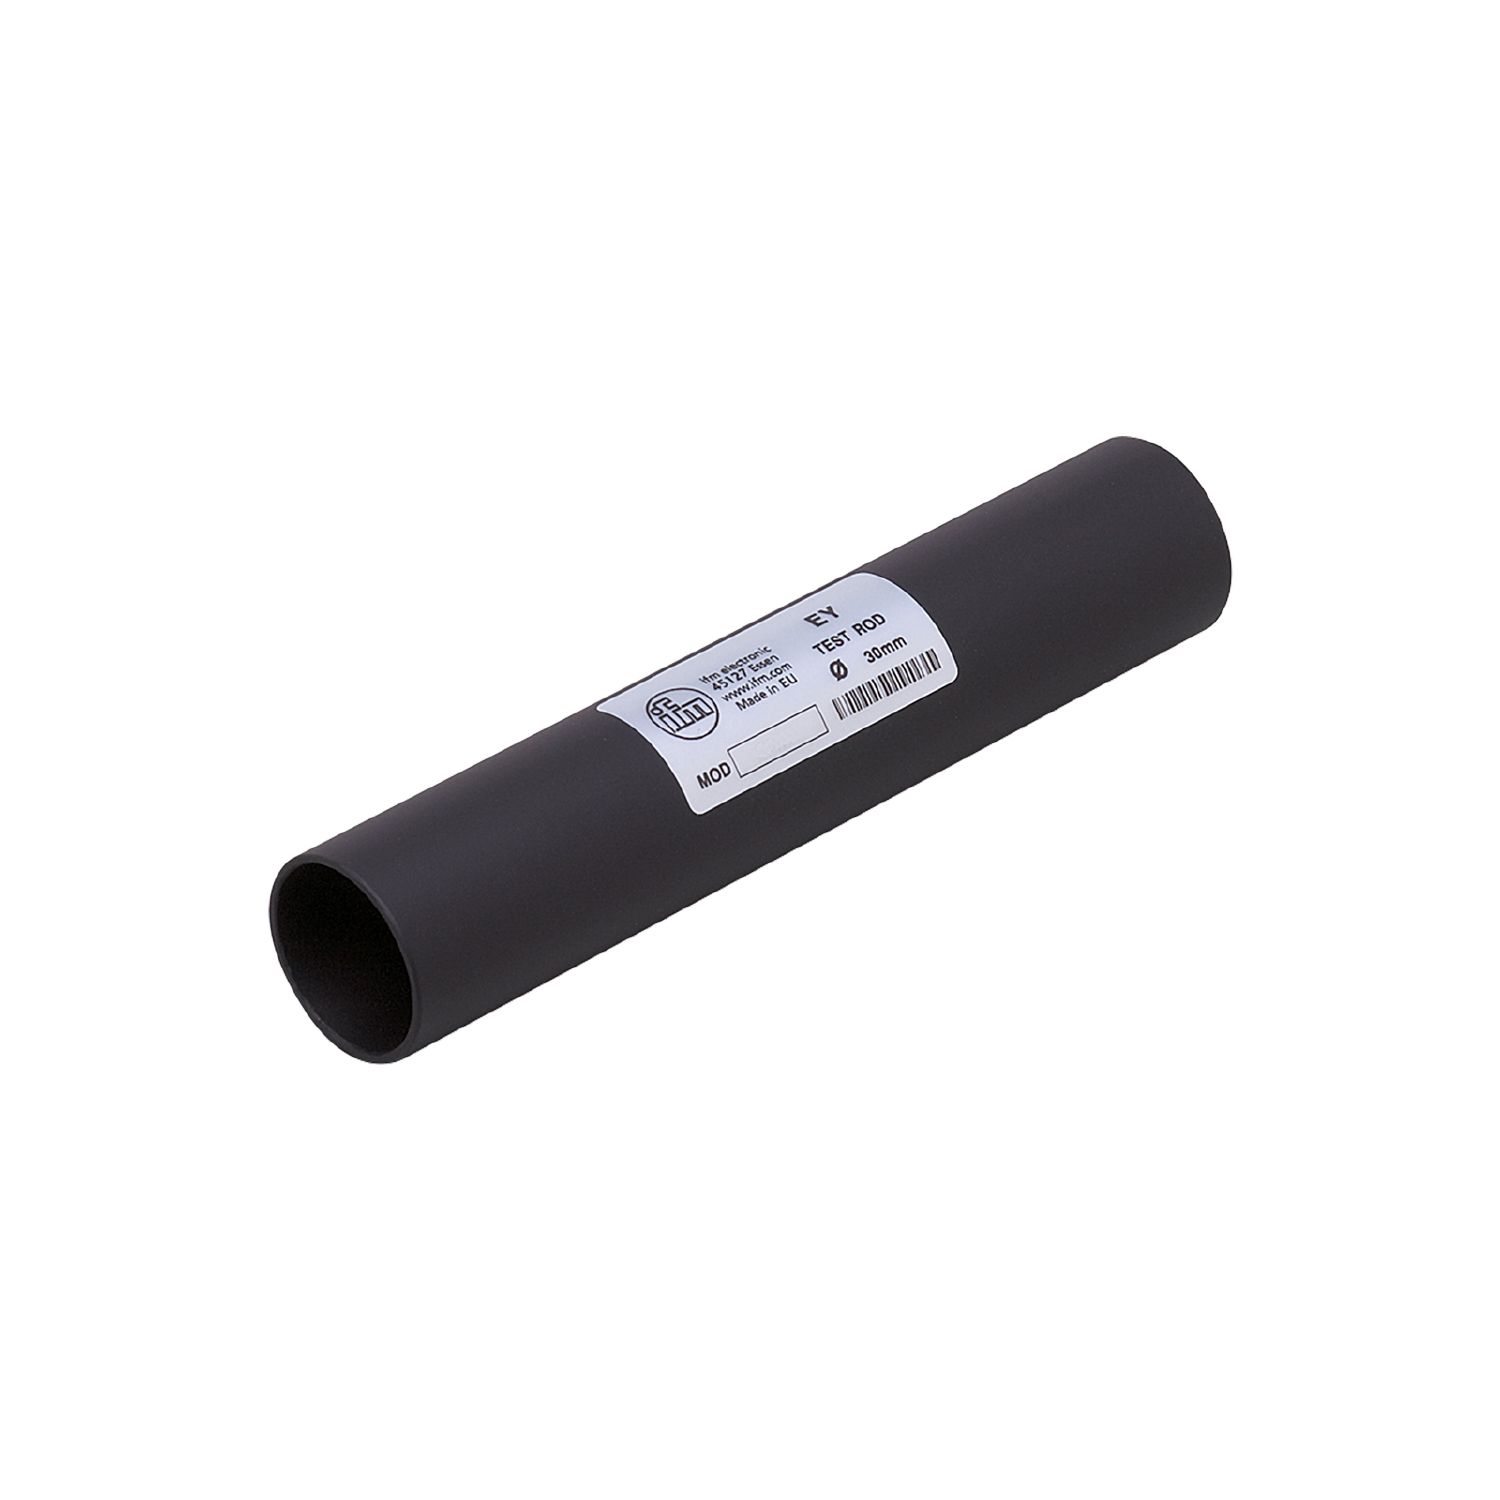 EY3006 - Test rod for safety light curtains - ifm